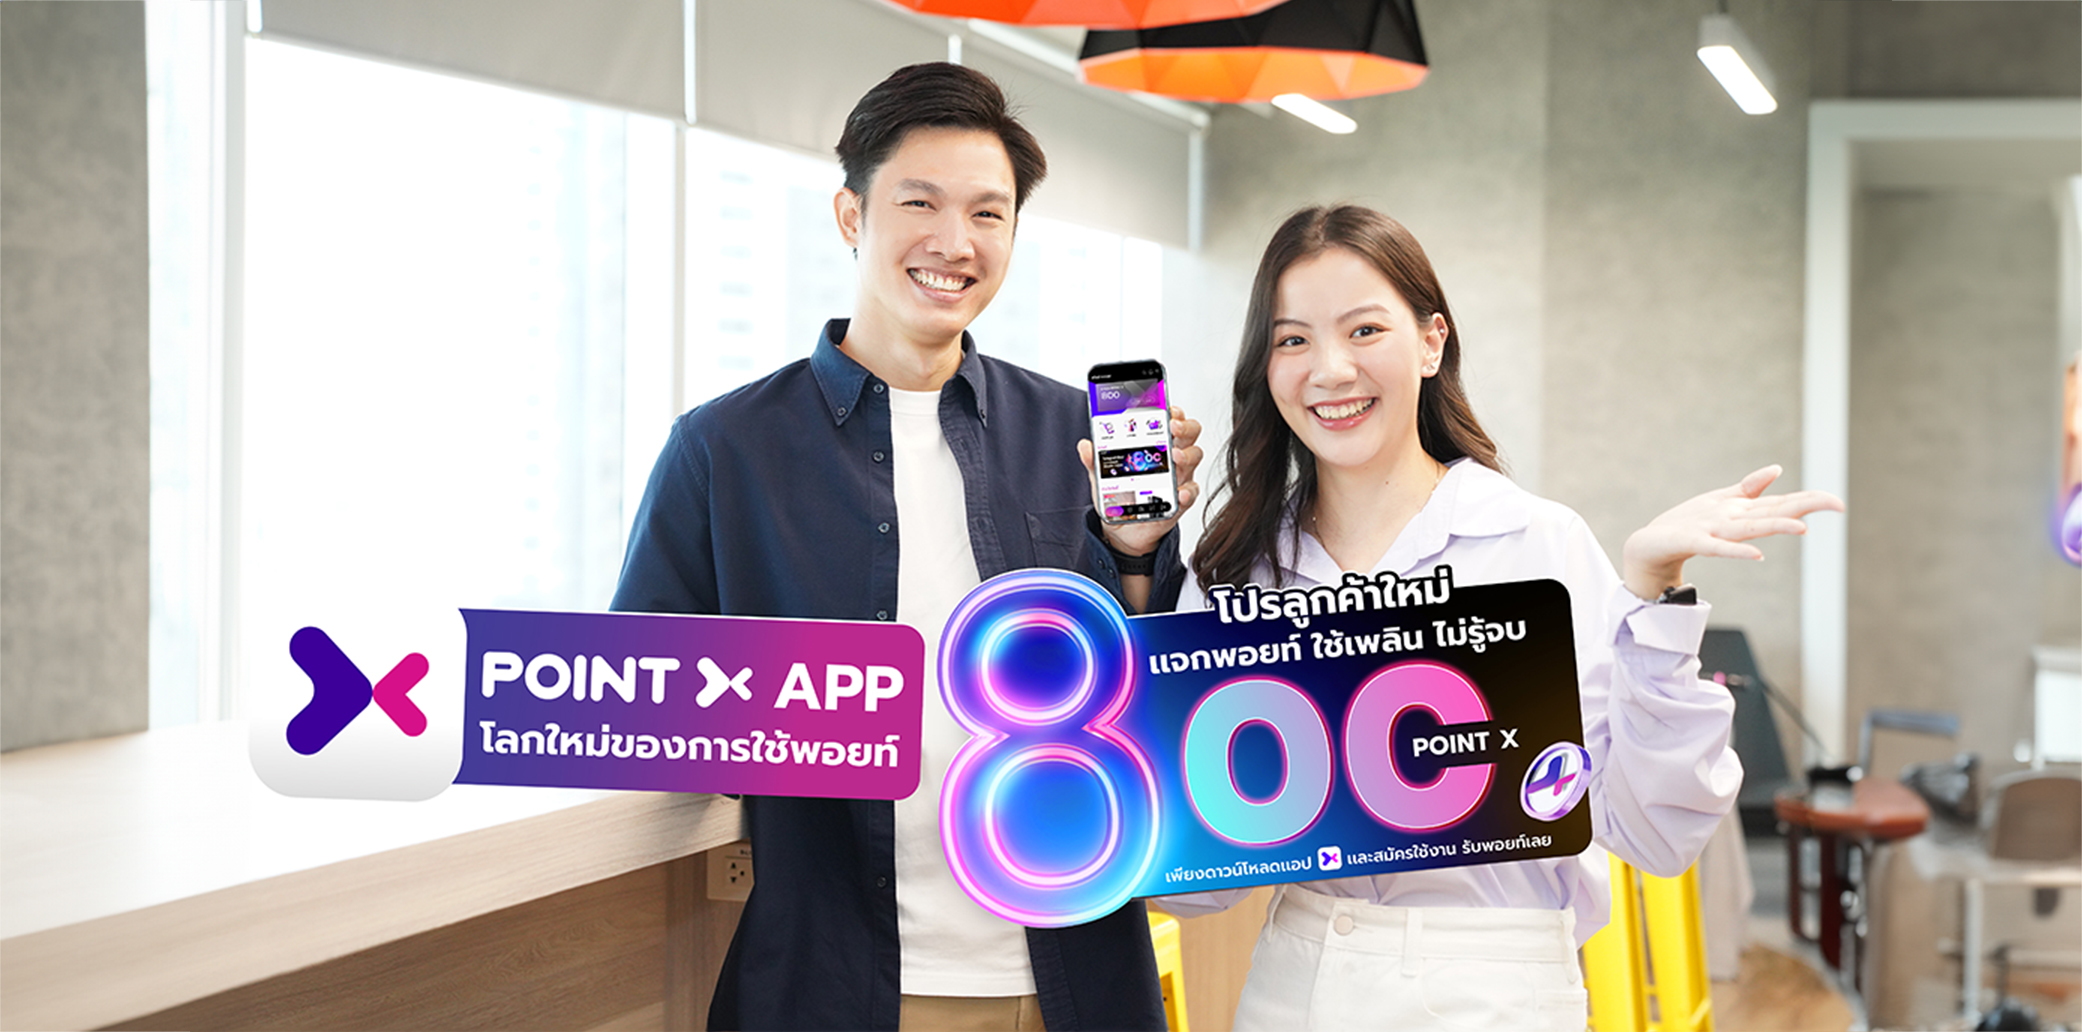 In celebration the 8th month of the year, PointX offers new users a complimentary 800 PointX when they download the app and sign up. Additionally, we are excited to present eight remarkable promotions that can be enjoyed using these points indefinitely